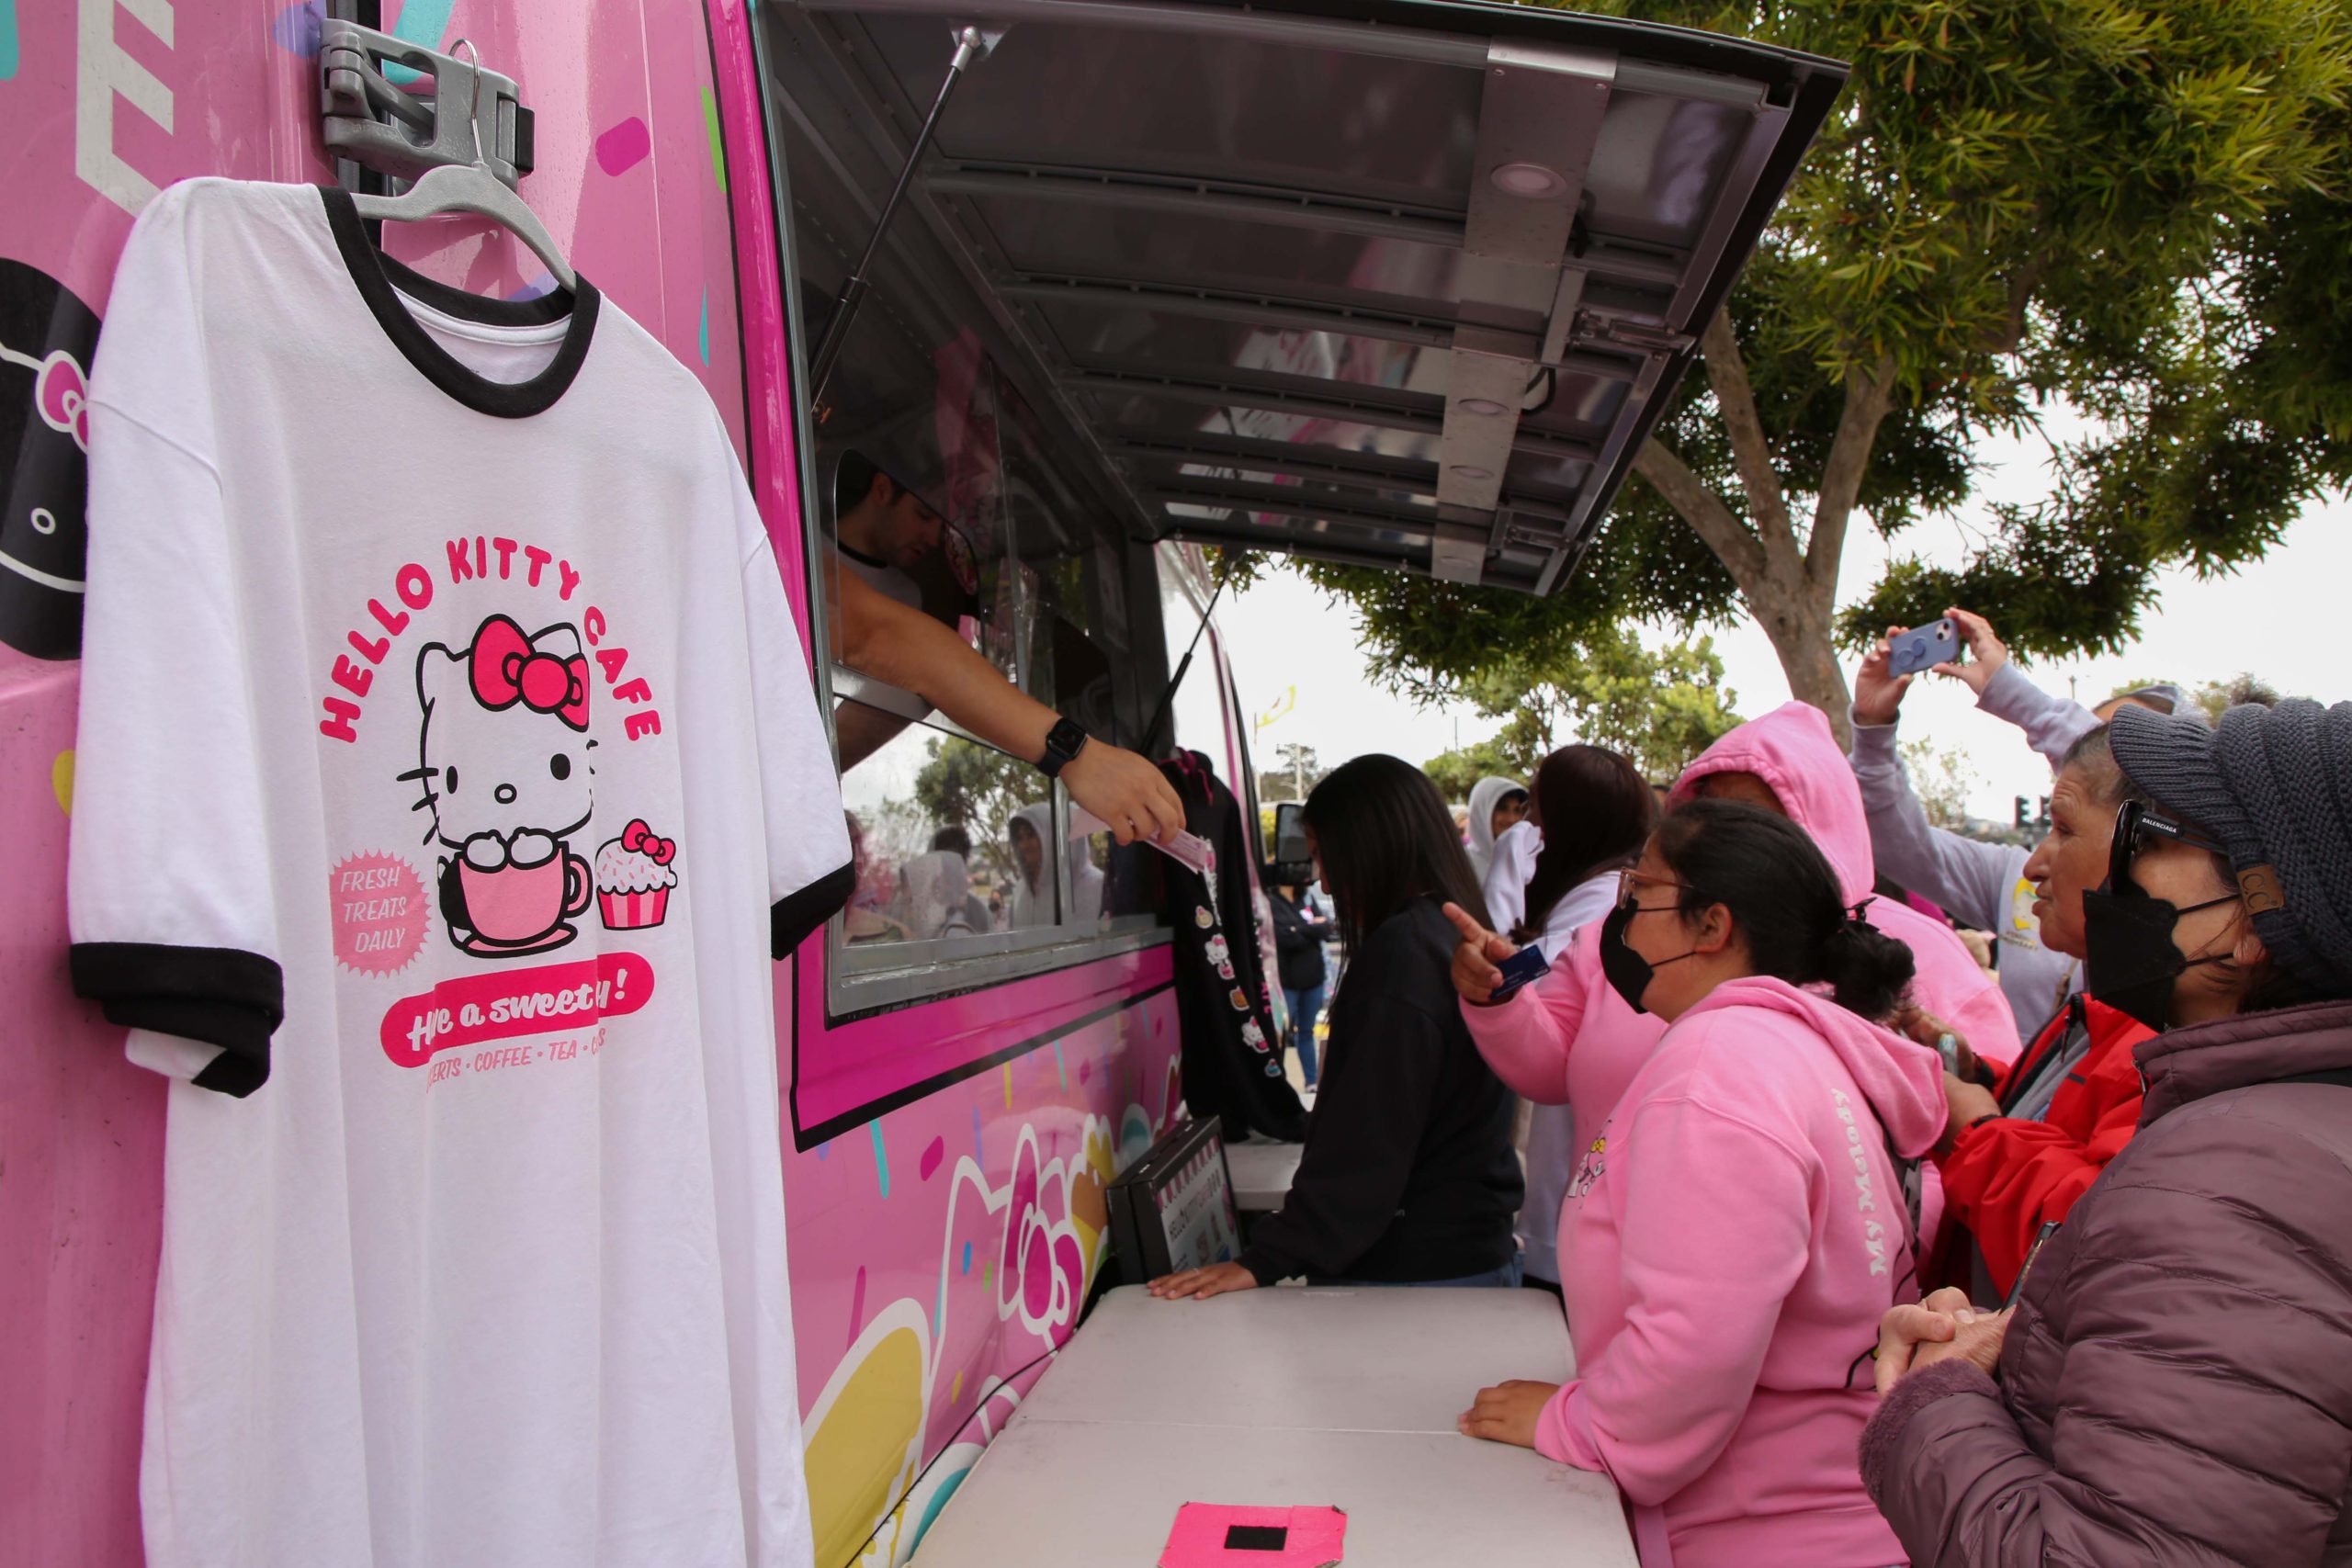 Golden Gate Xpress Hello Kitty Cafe Truck returns to the Bay Area for